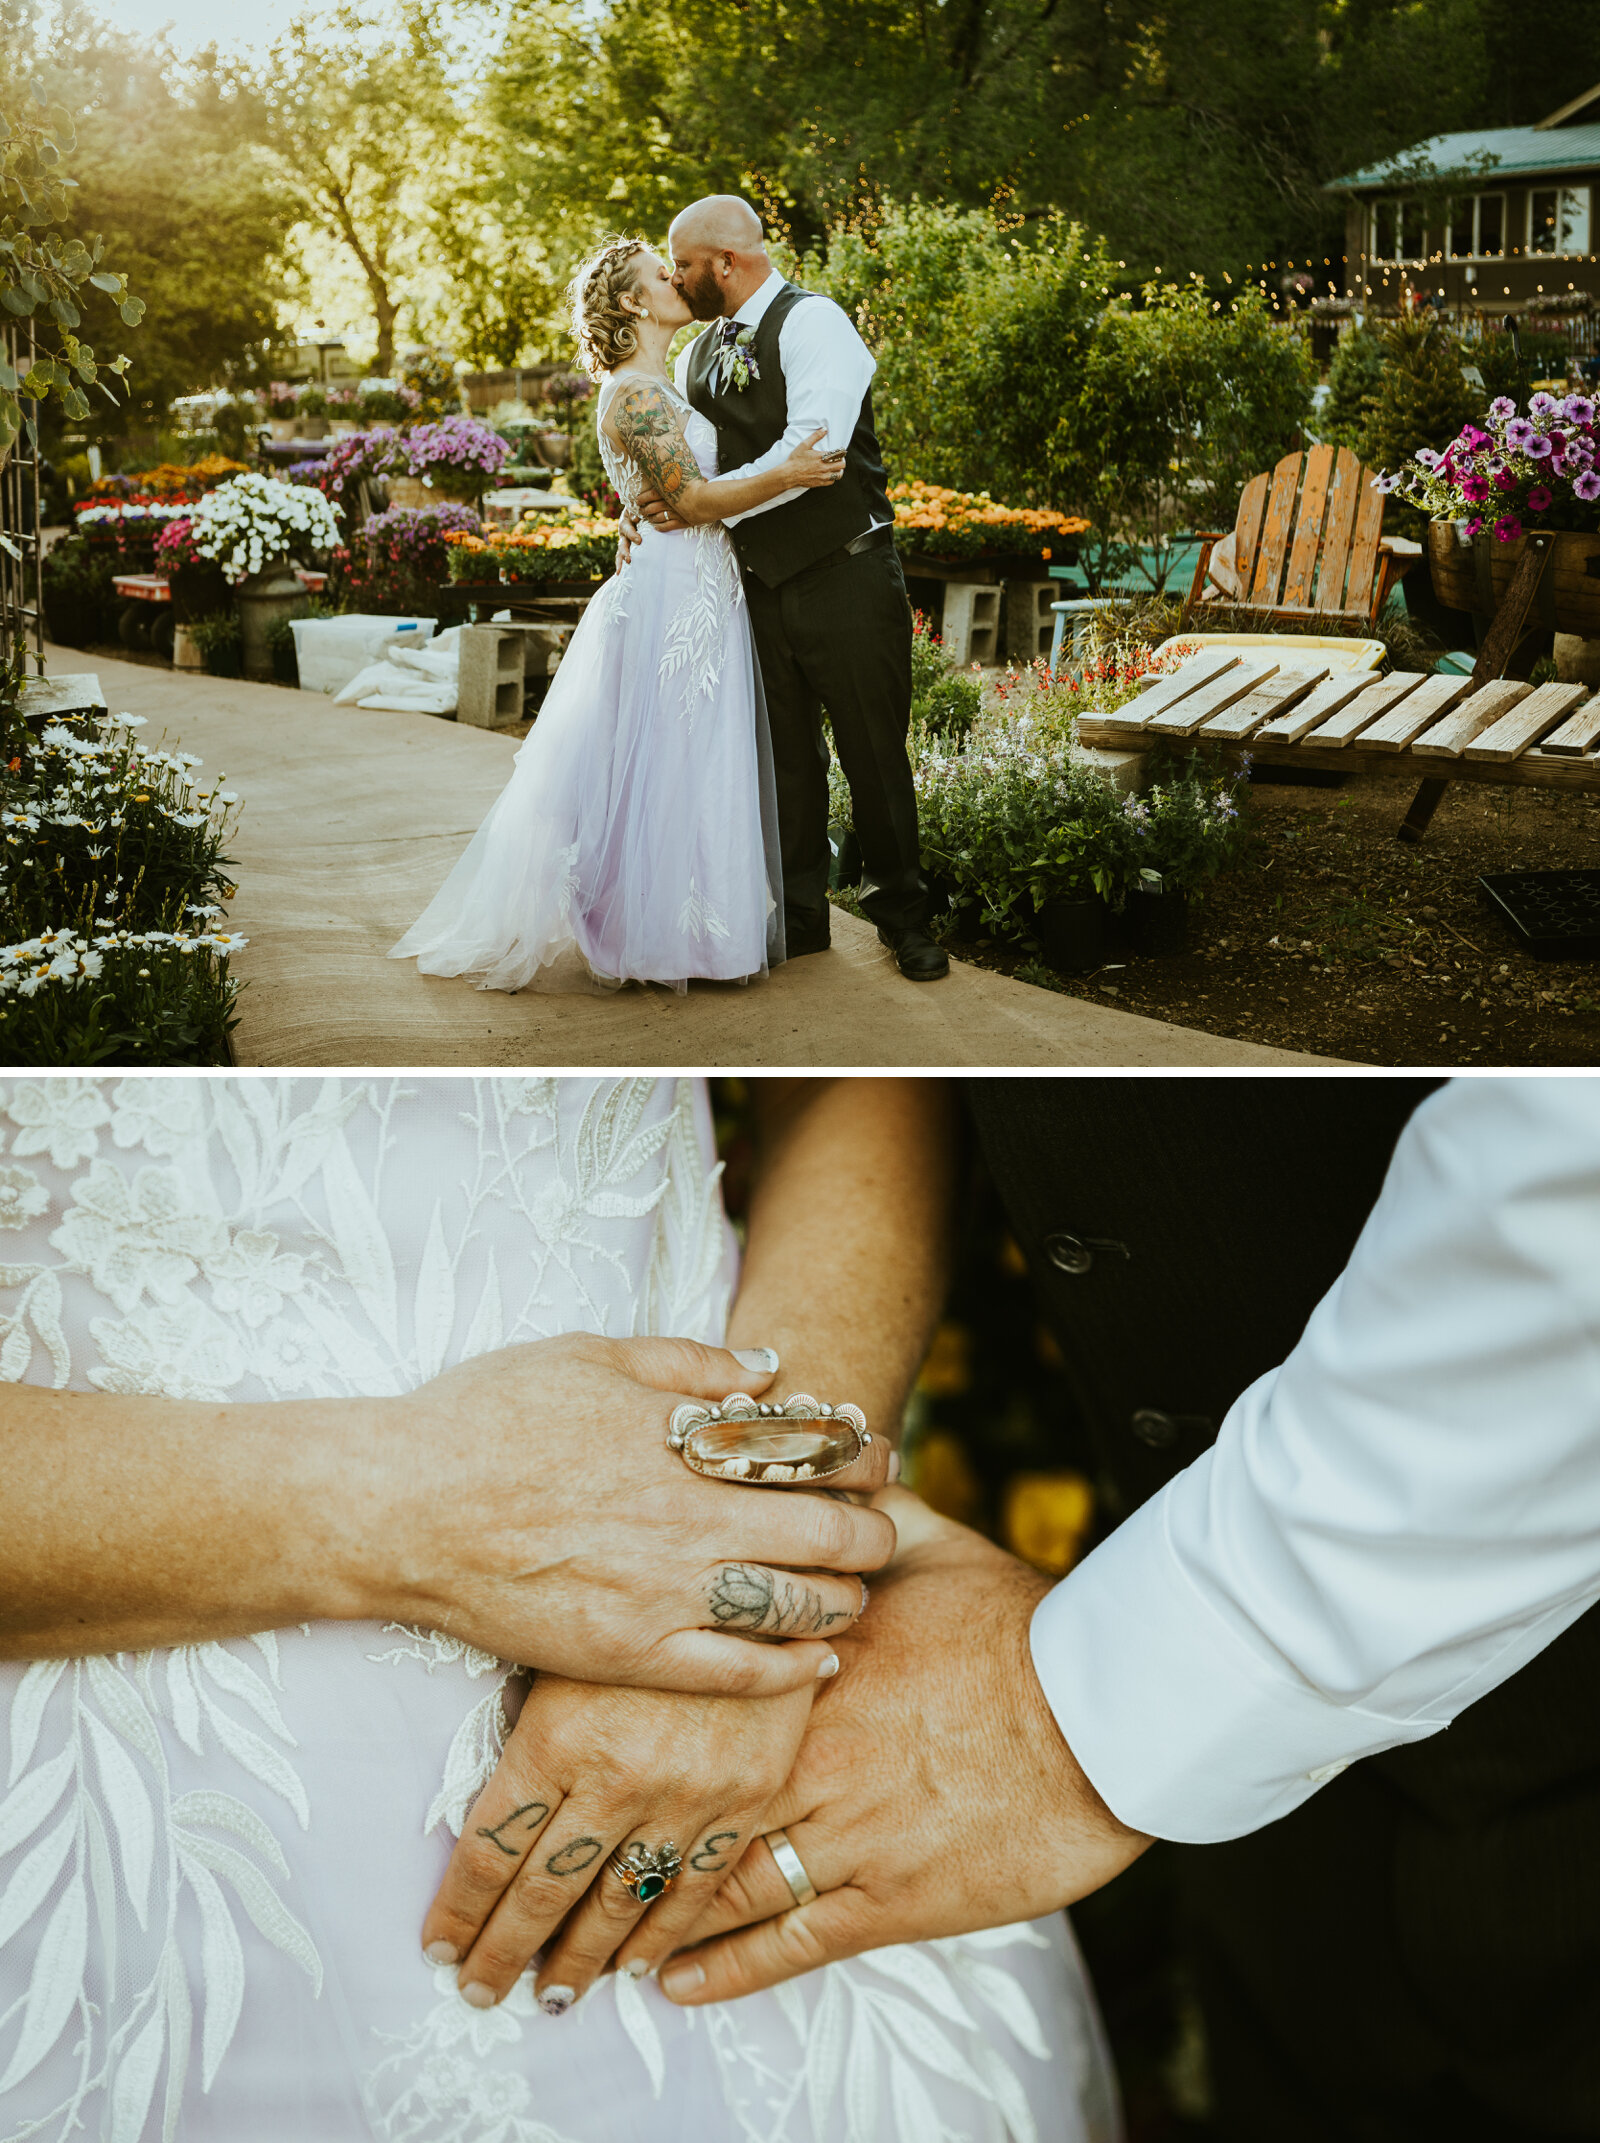 A bride and groom kissing at violas flower garden in flagstaff arizona, the bride is wearing a purple wedding dress and there are flowers blooming in the background.jpg